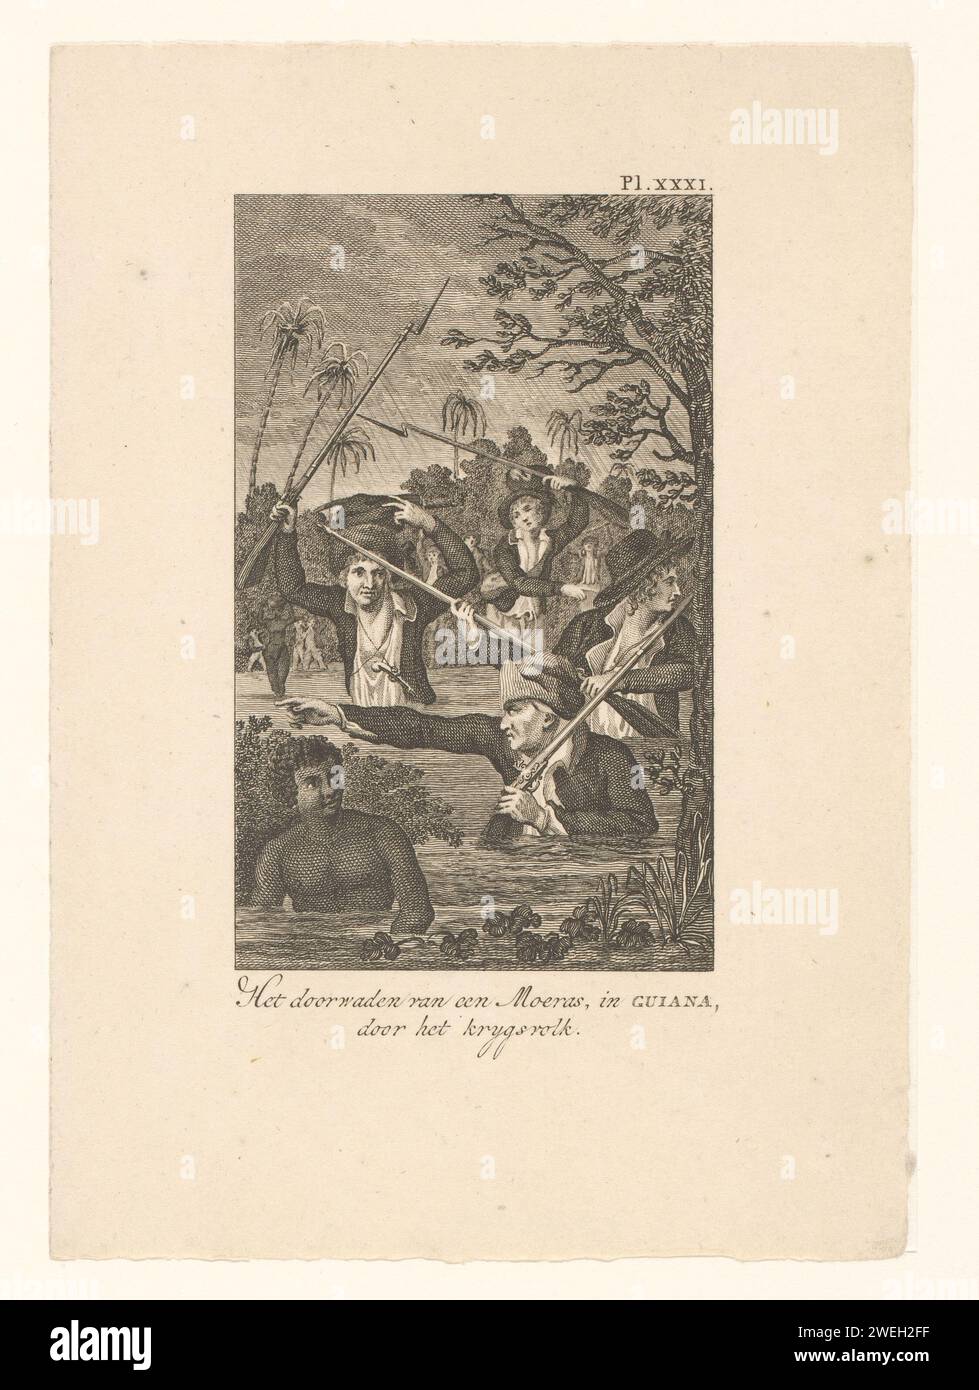 Colonel Henry Louis Fourgeoud, fords with his men a swamp, Anonymous, 1799 print Numbered at the top right: pl. Xxxi.  paper etching / engraving exploration, expedition, voyage of discovery. slavery; serfs and the enslaved. historical persons Suriname. Guyana Stock Photo